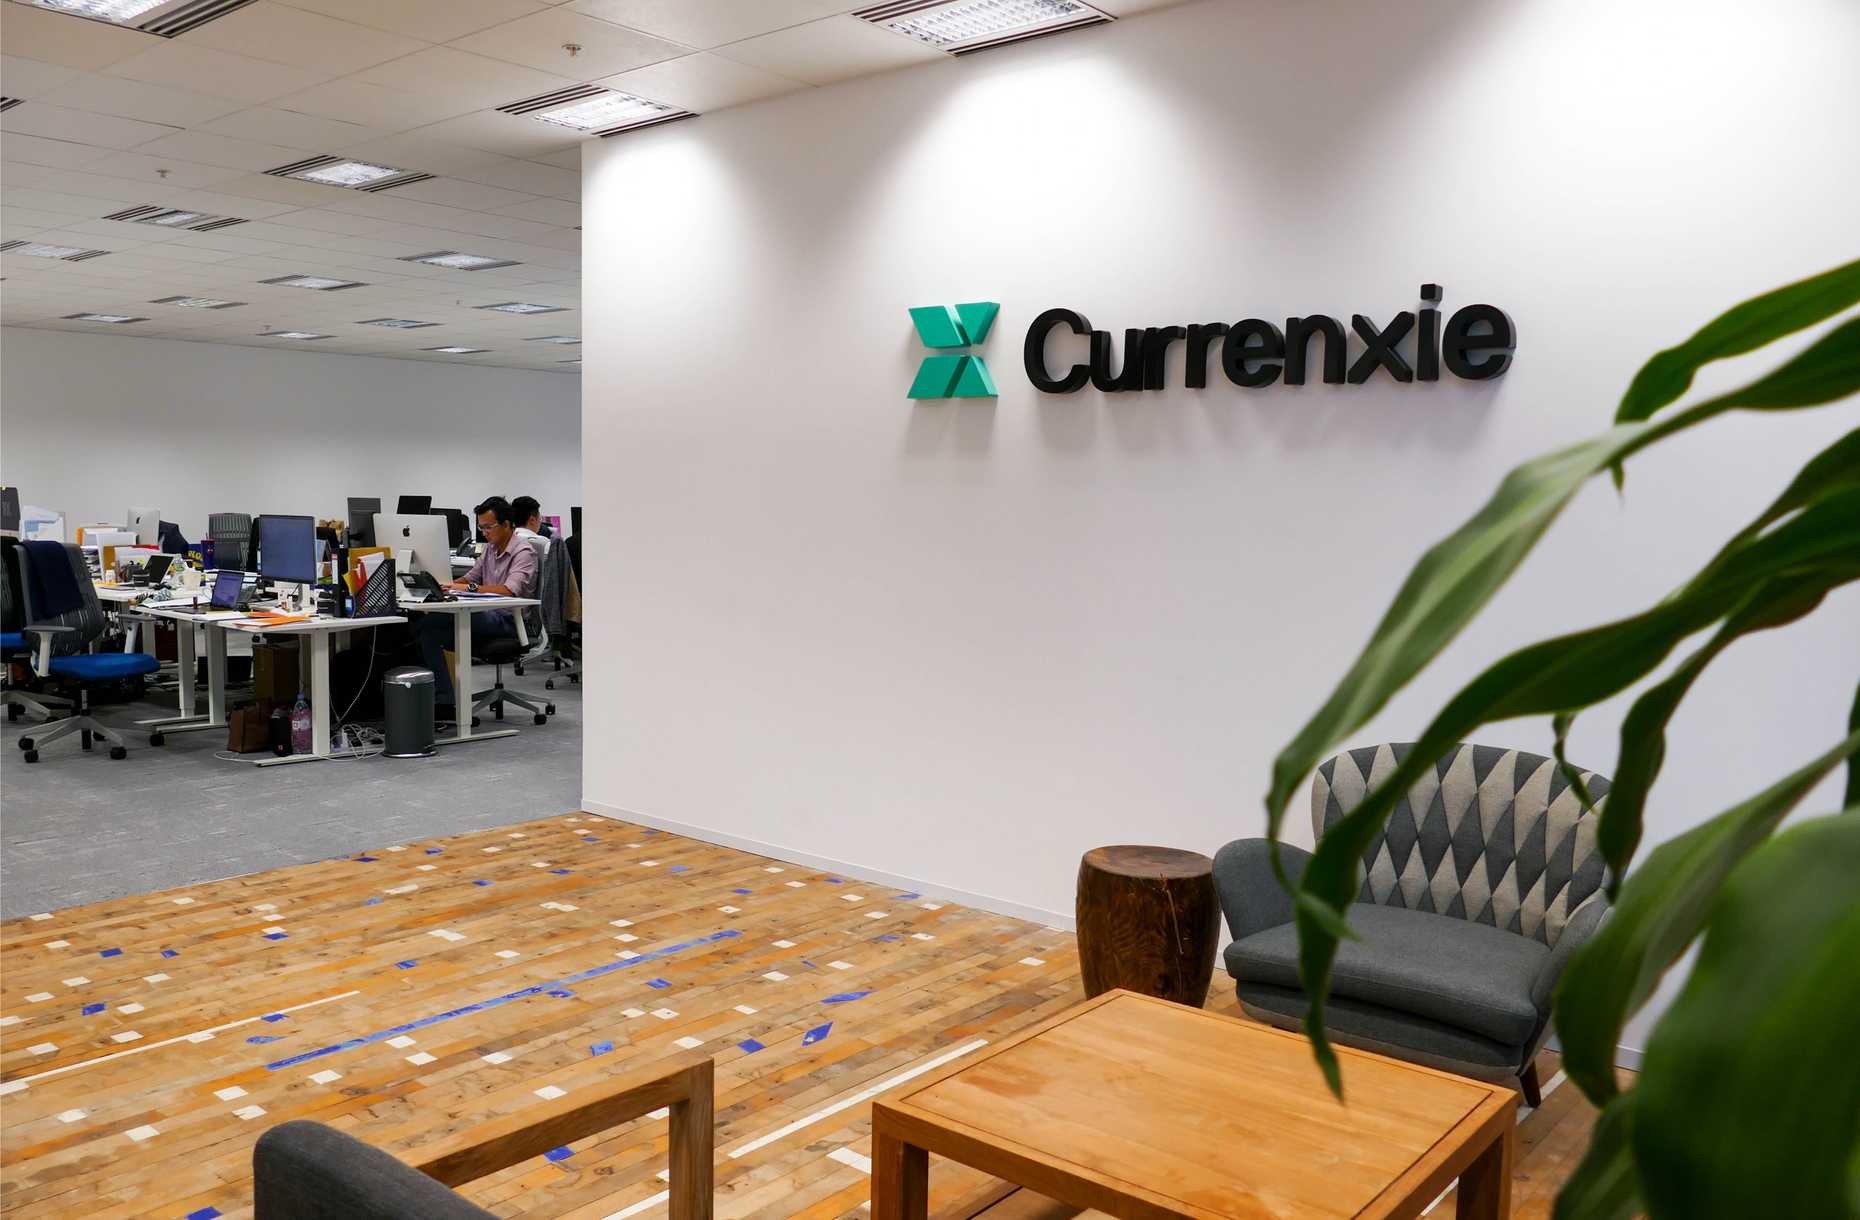 Currenxie Limited office in Hong Kong, Currenxie Limited香港辦事處, Currenxie Limited香港办事处